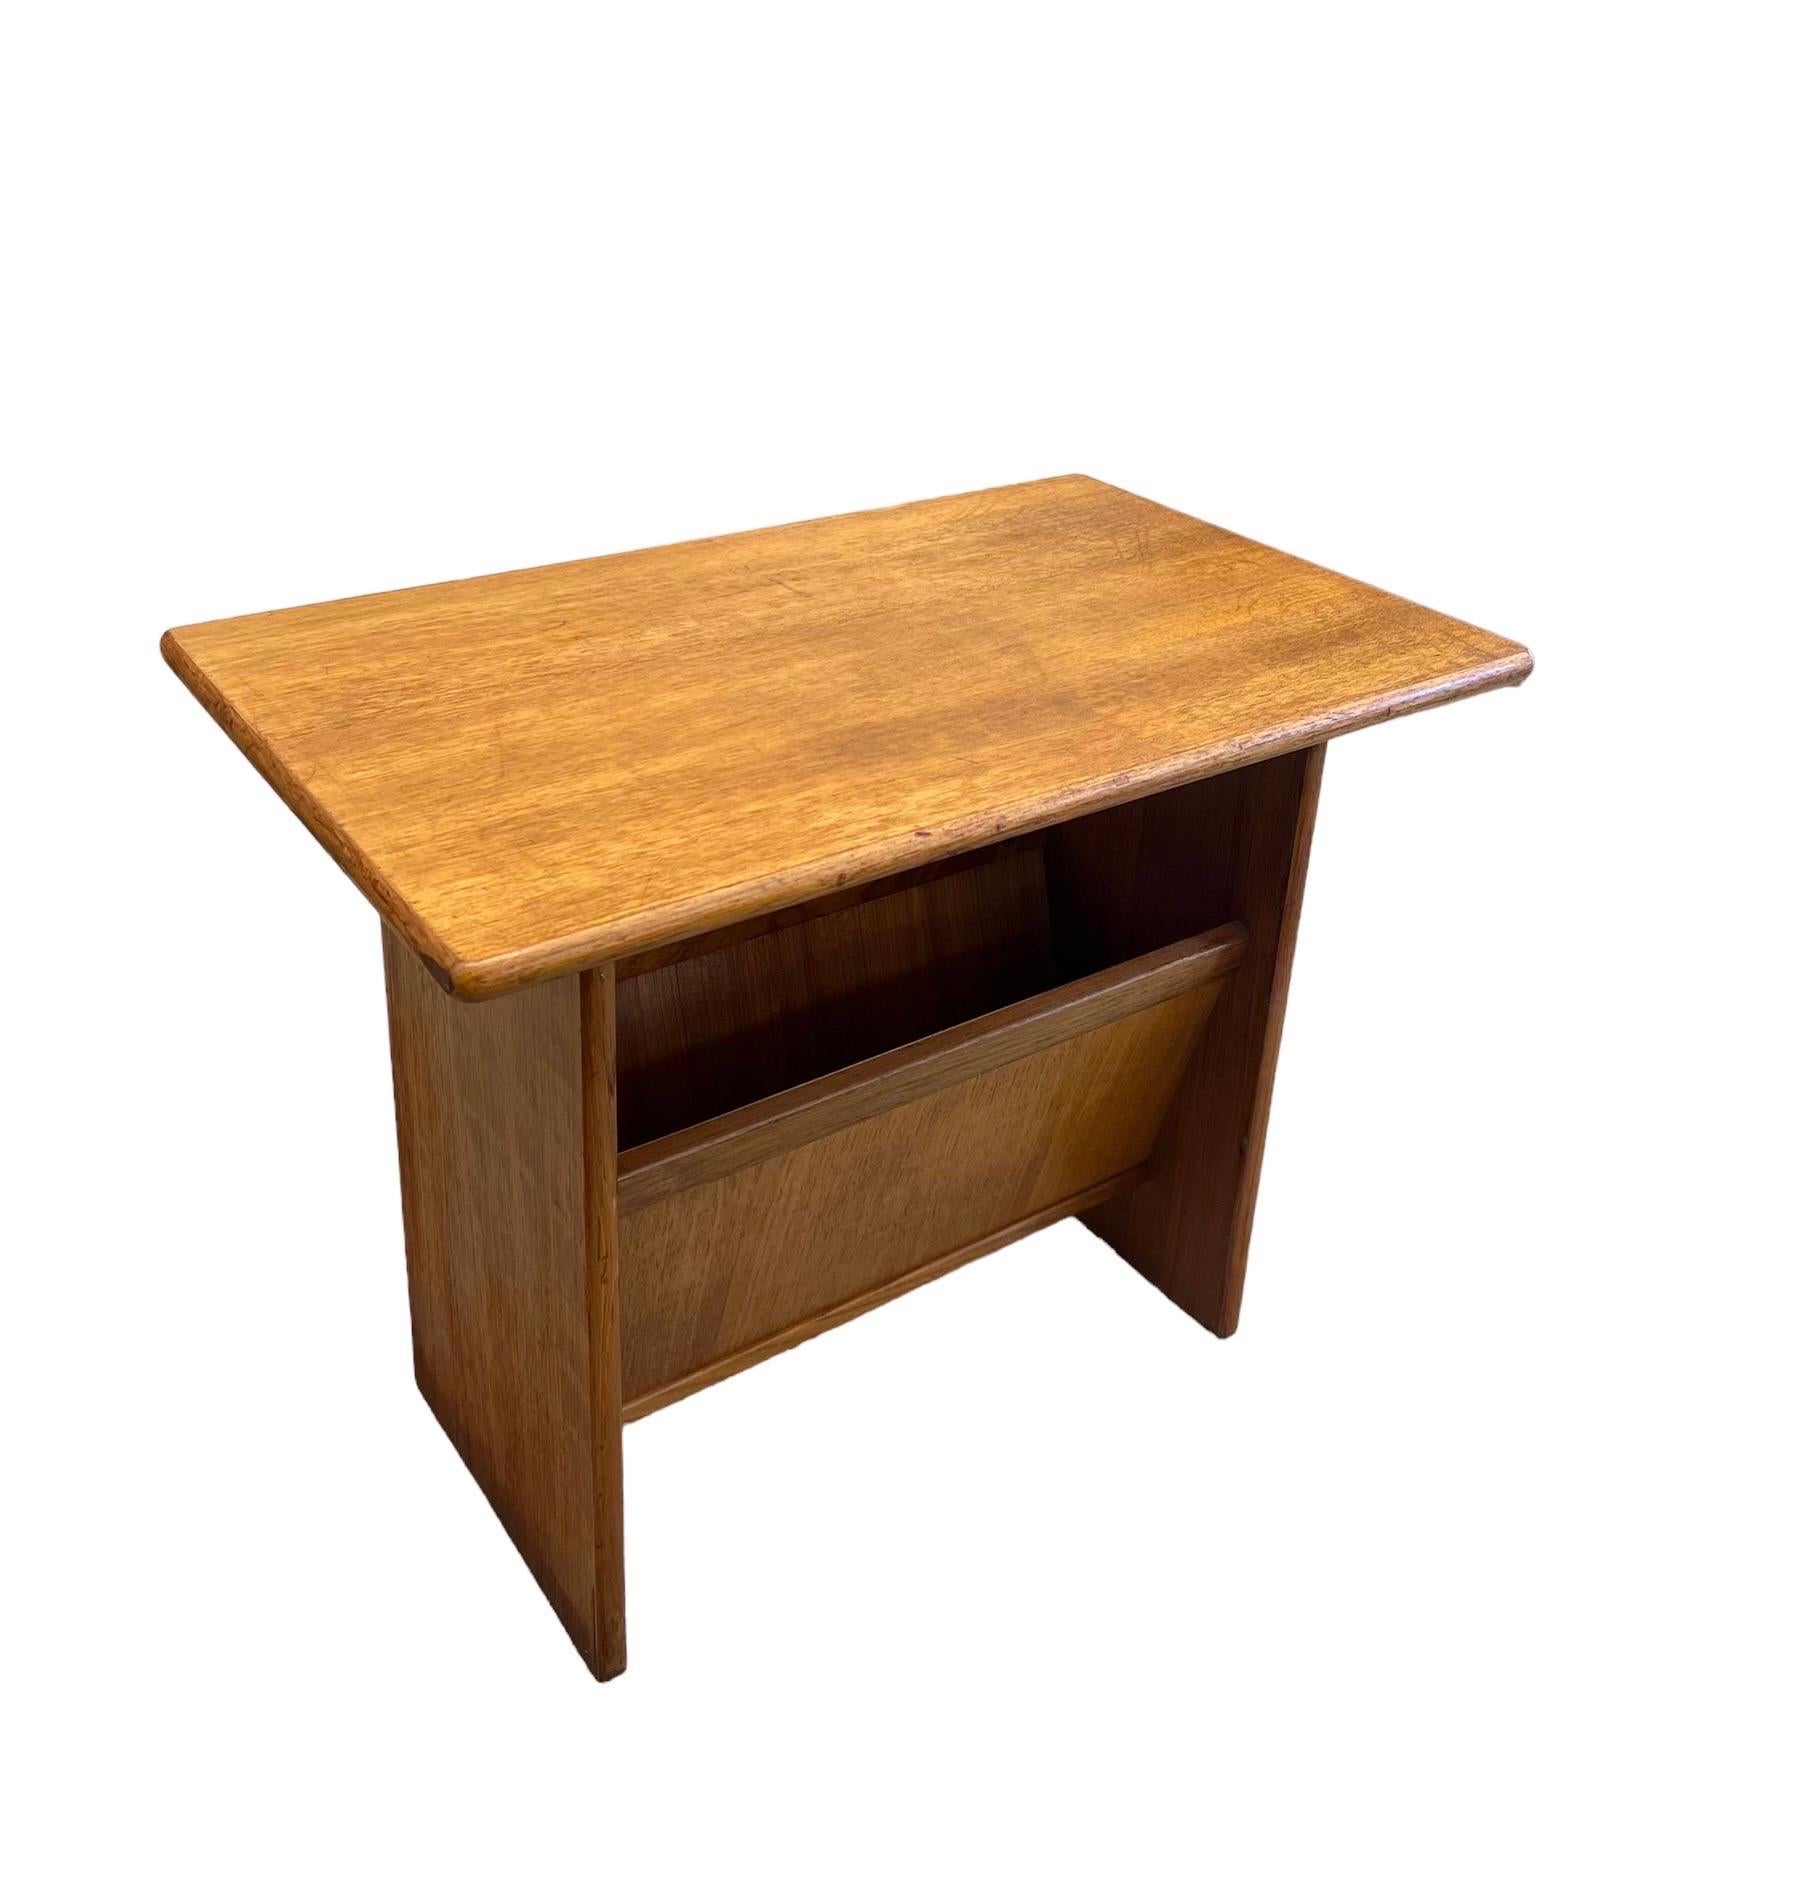 Danish Mid-Century Modern End Table with Magazine Rack

Dimensions. 25 W ; 15 D ; 20H.